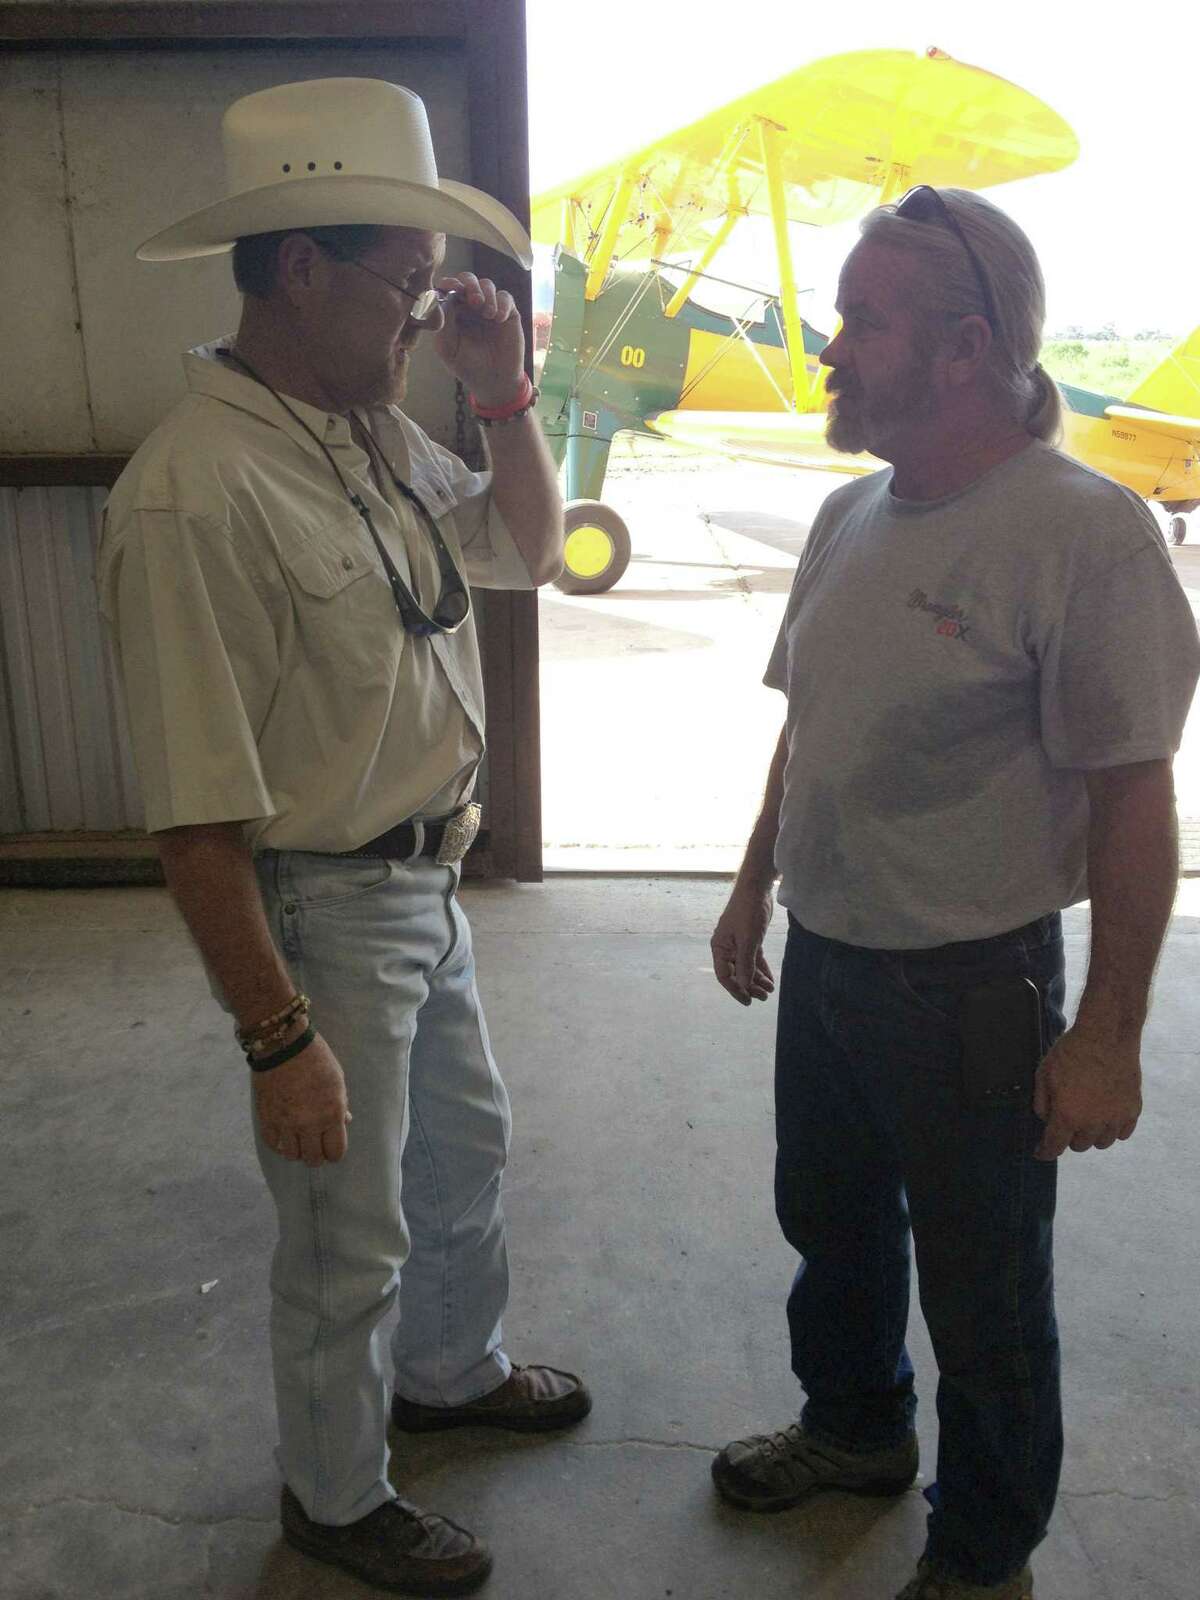 David Mitchell, left, talks with mechanic Brad CAlloway about a new distribution system being installed in their planes. In the background is a Stearman plane, one of the first planes used by the company to seed Southeast Texas' rice fields by air.